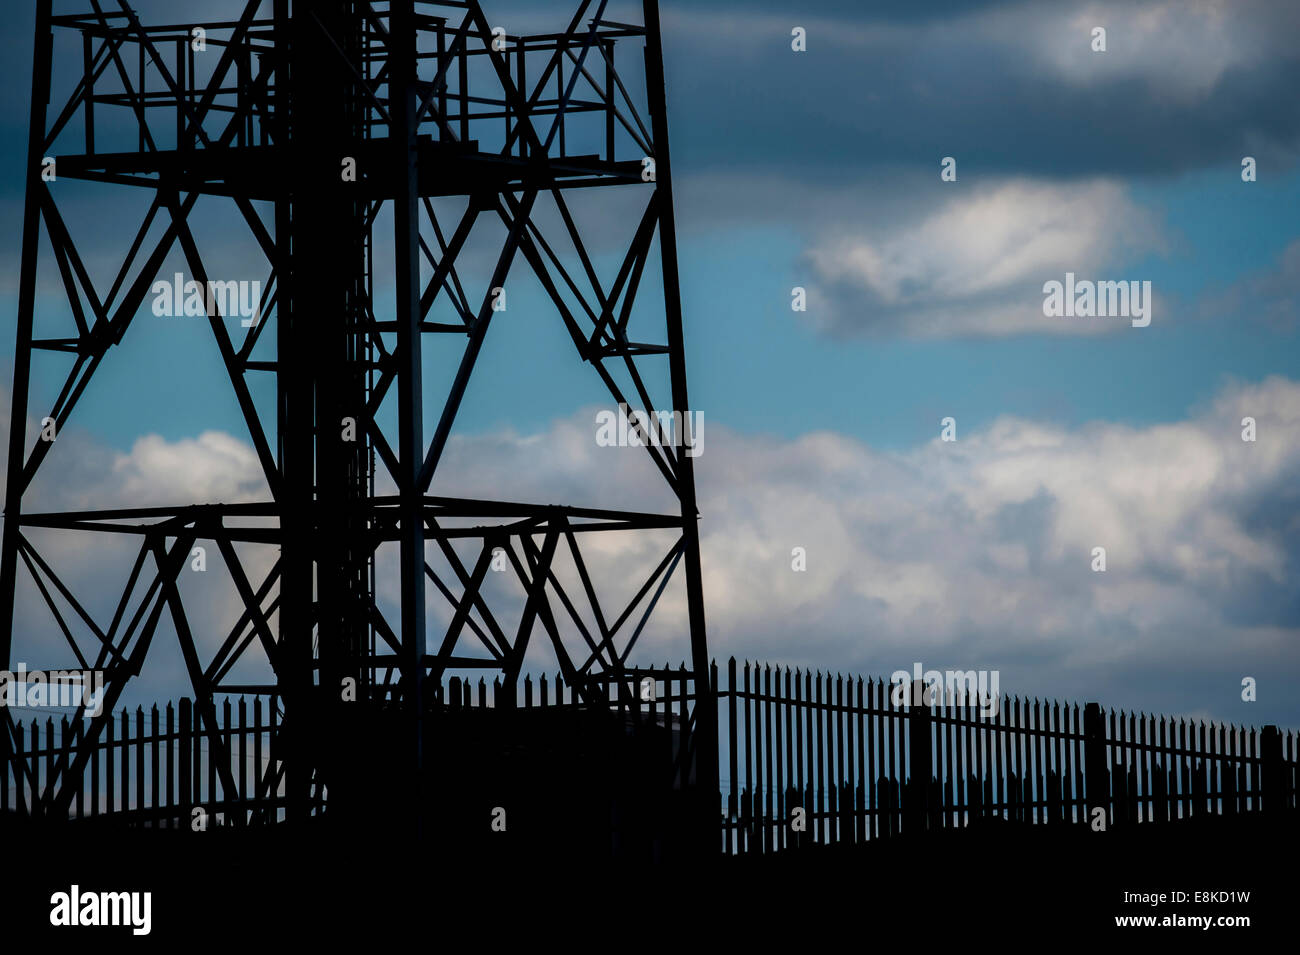 Silhouette of mobile phone mast and fencing. Stock Photo